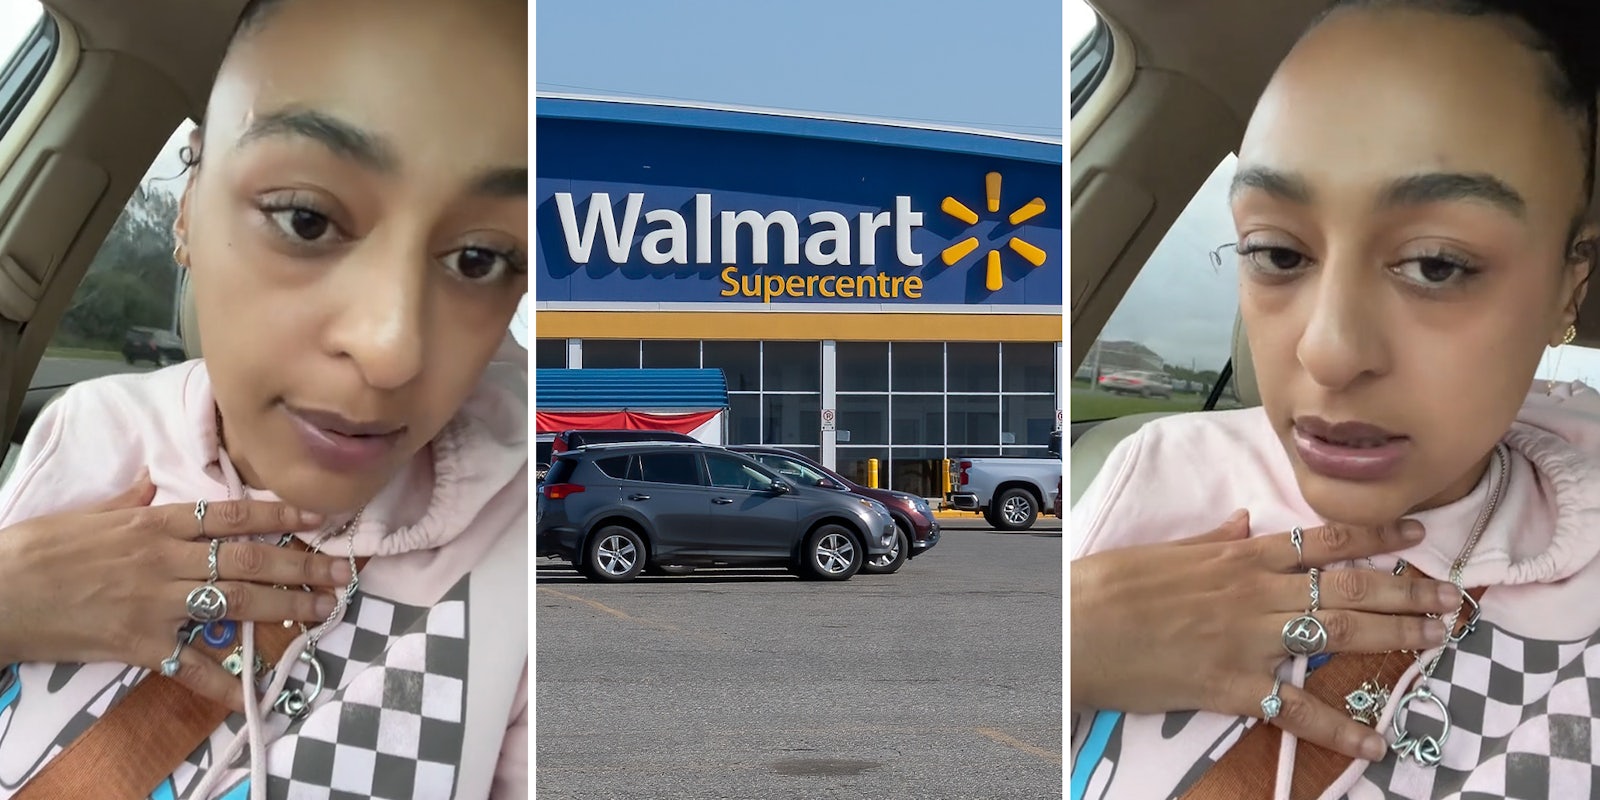 Walmart shopper says woman put her in uncomfortable position when checking out